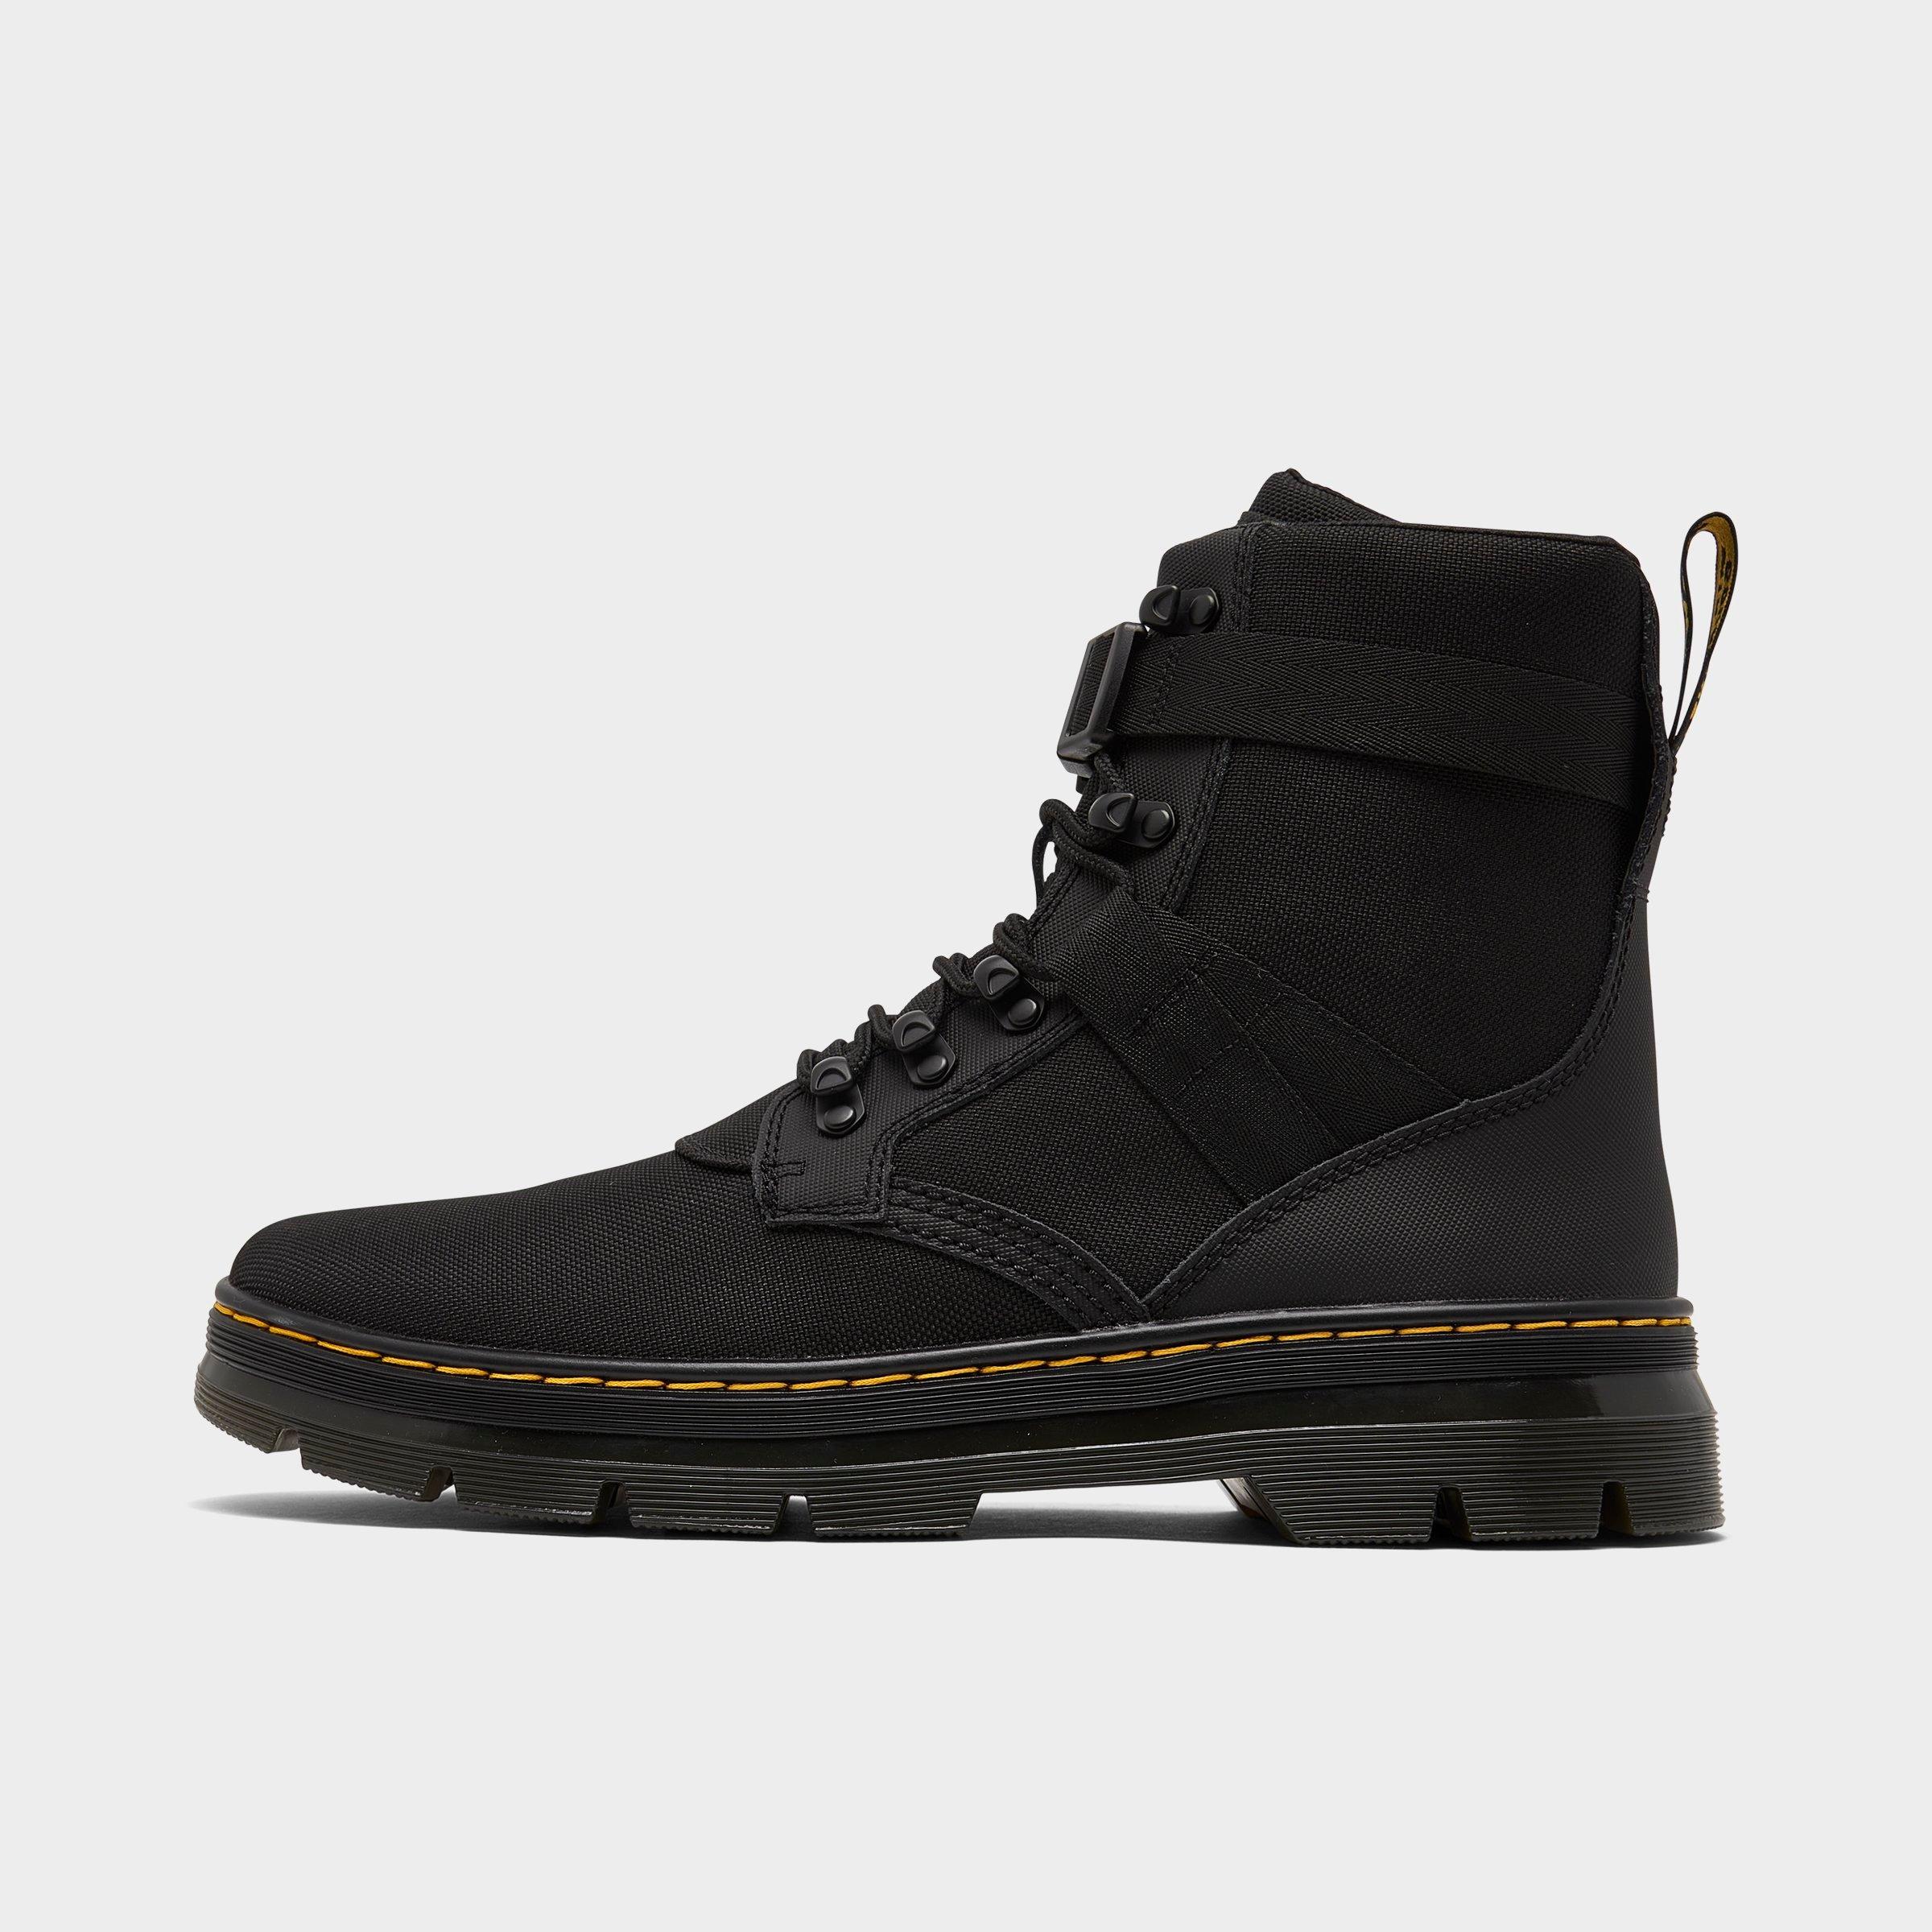 DR MARTENS Combs Tech II Poly Casual Boots